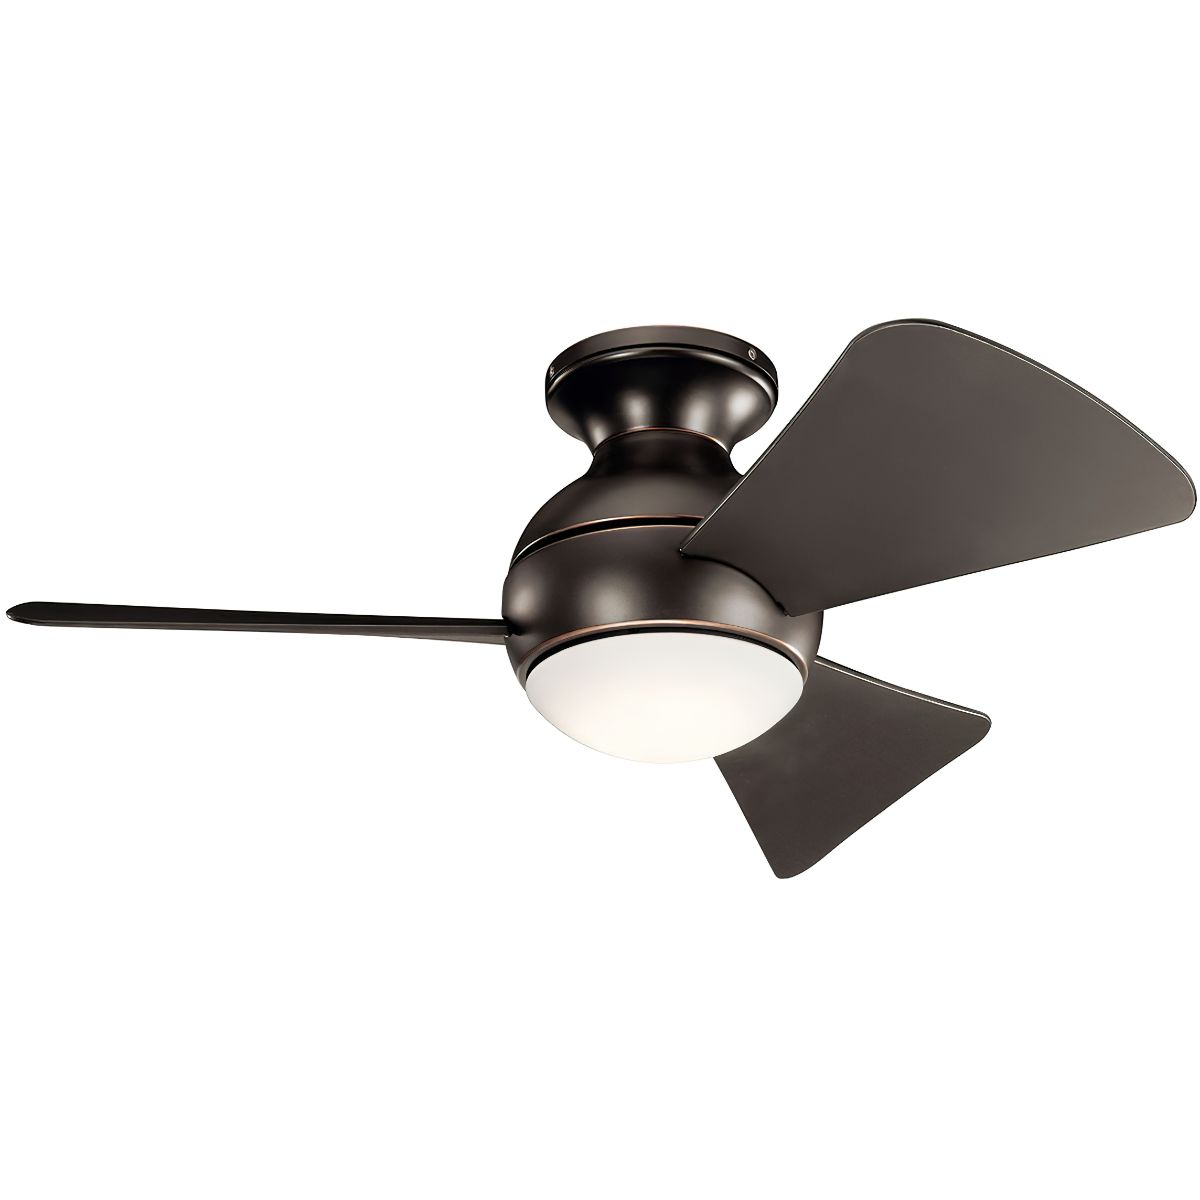 Sola 34 Inch Propeller Outdoor Ceiling Fan With Light, Wall Control Included